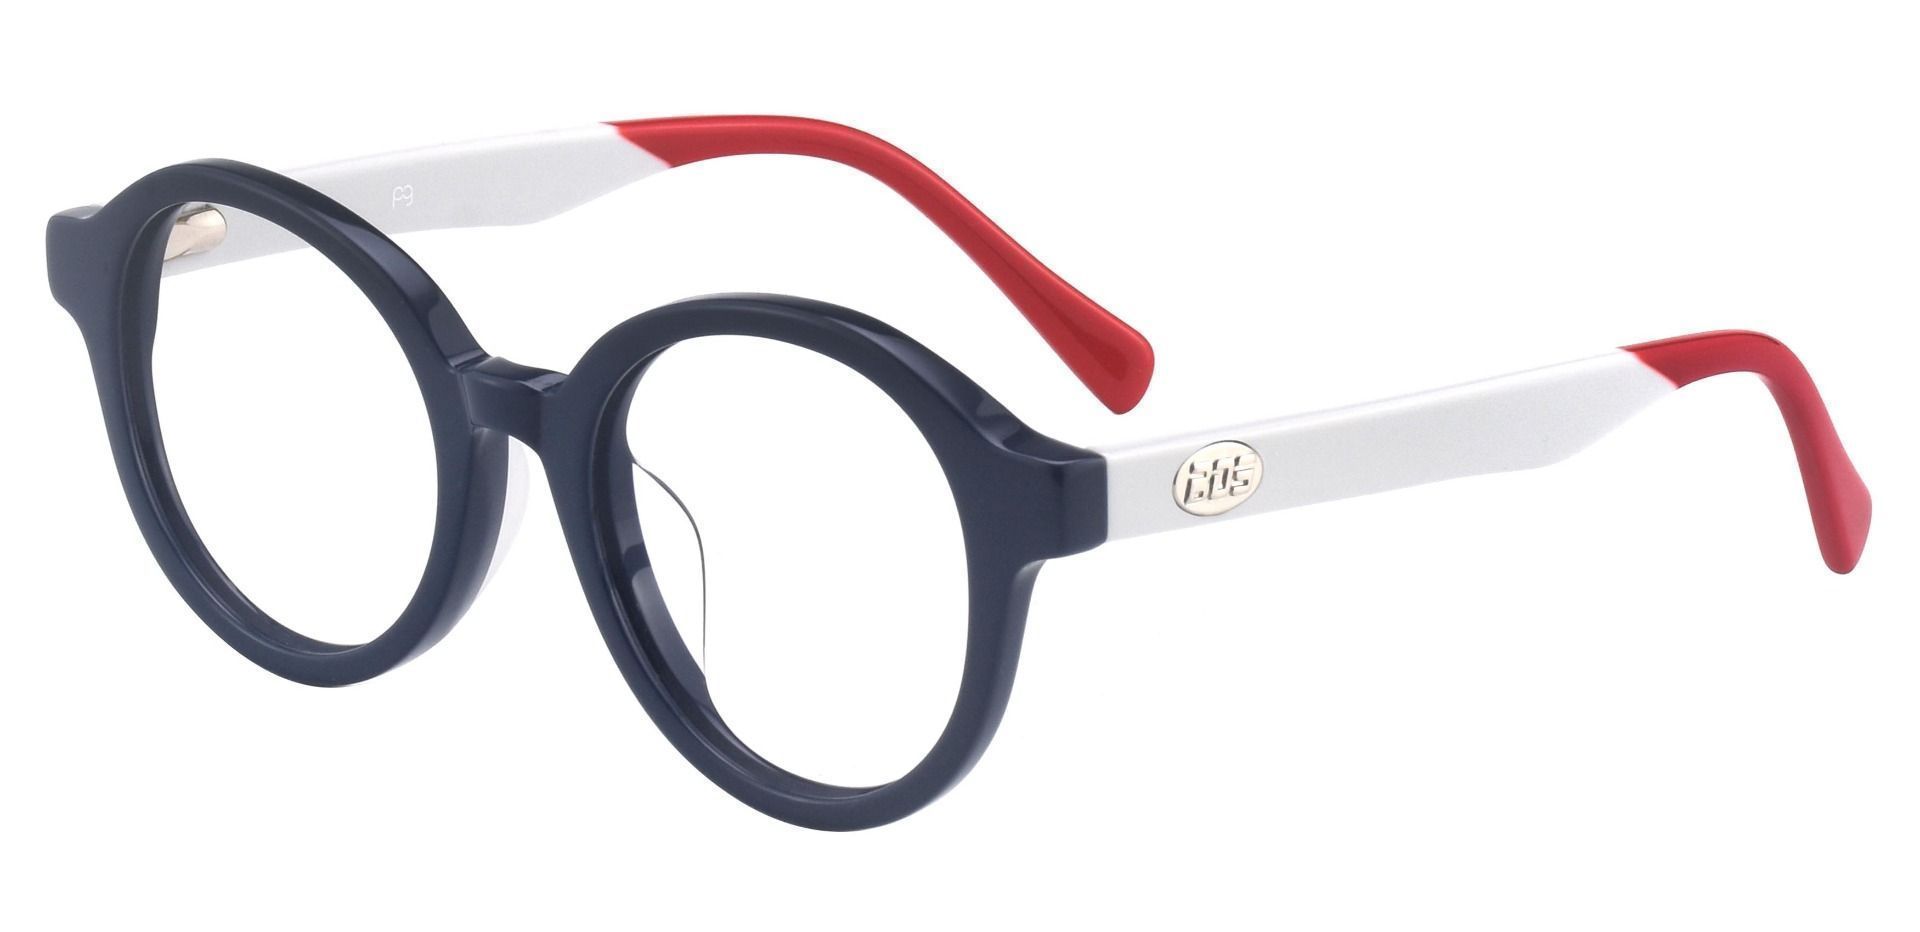 Roxbury Round Eyeglasses Frame - The Frame Is Blue And Red